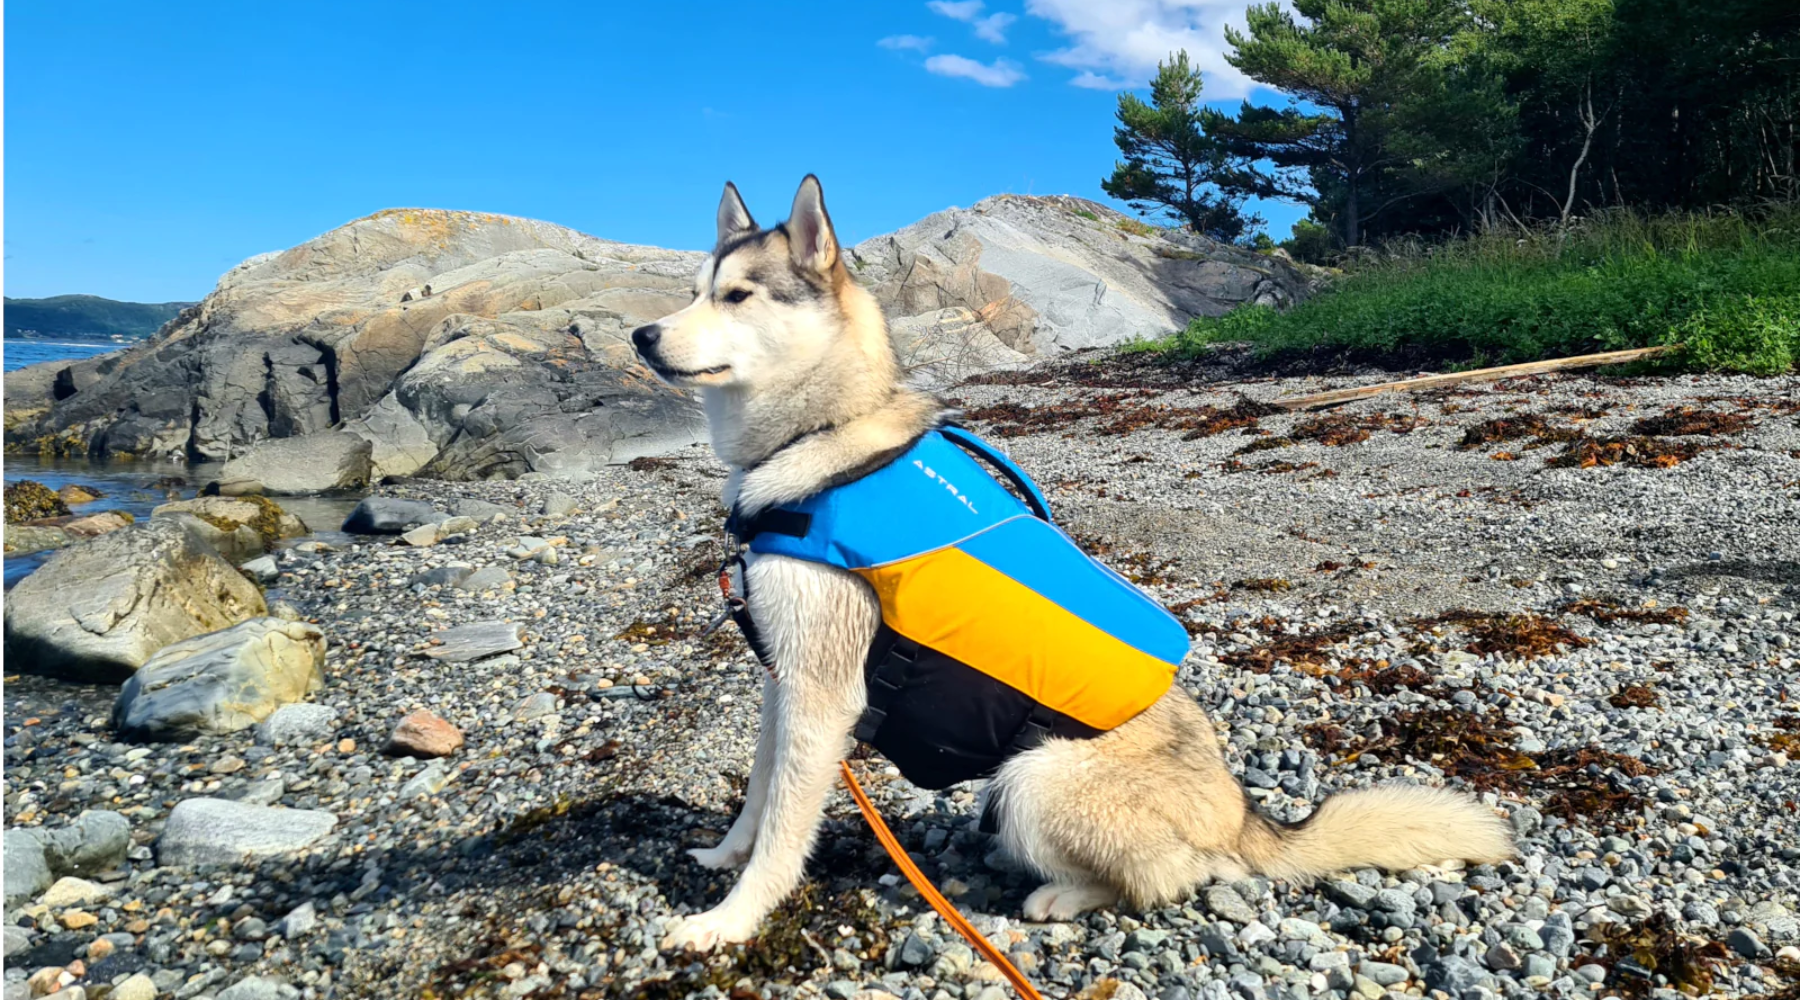 6 Tips for Packrafting with Your Dog